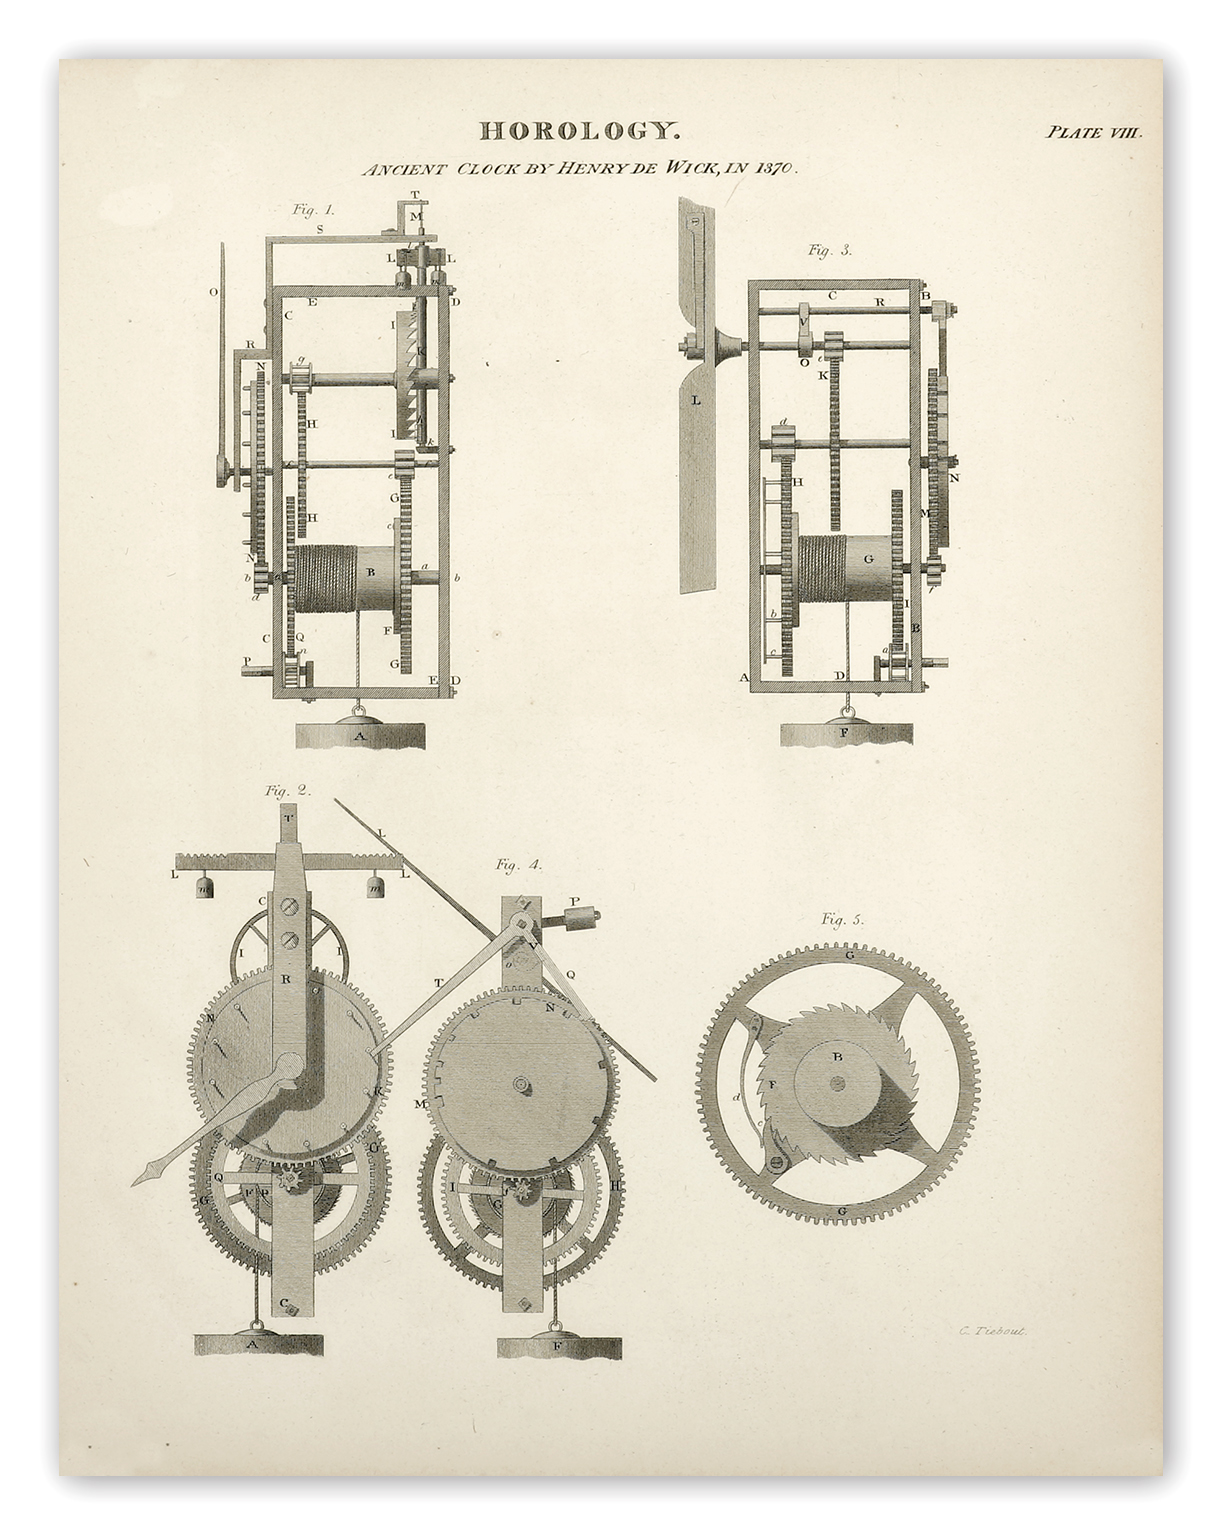 Horology. Ancient Clock by Henry de Wick, in 1370. - Antique Print from 1805